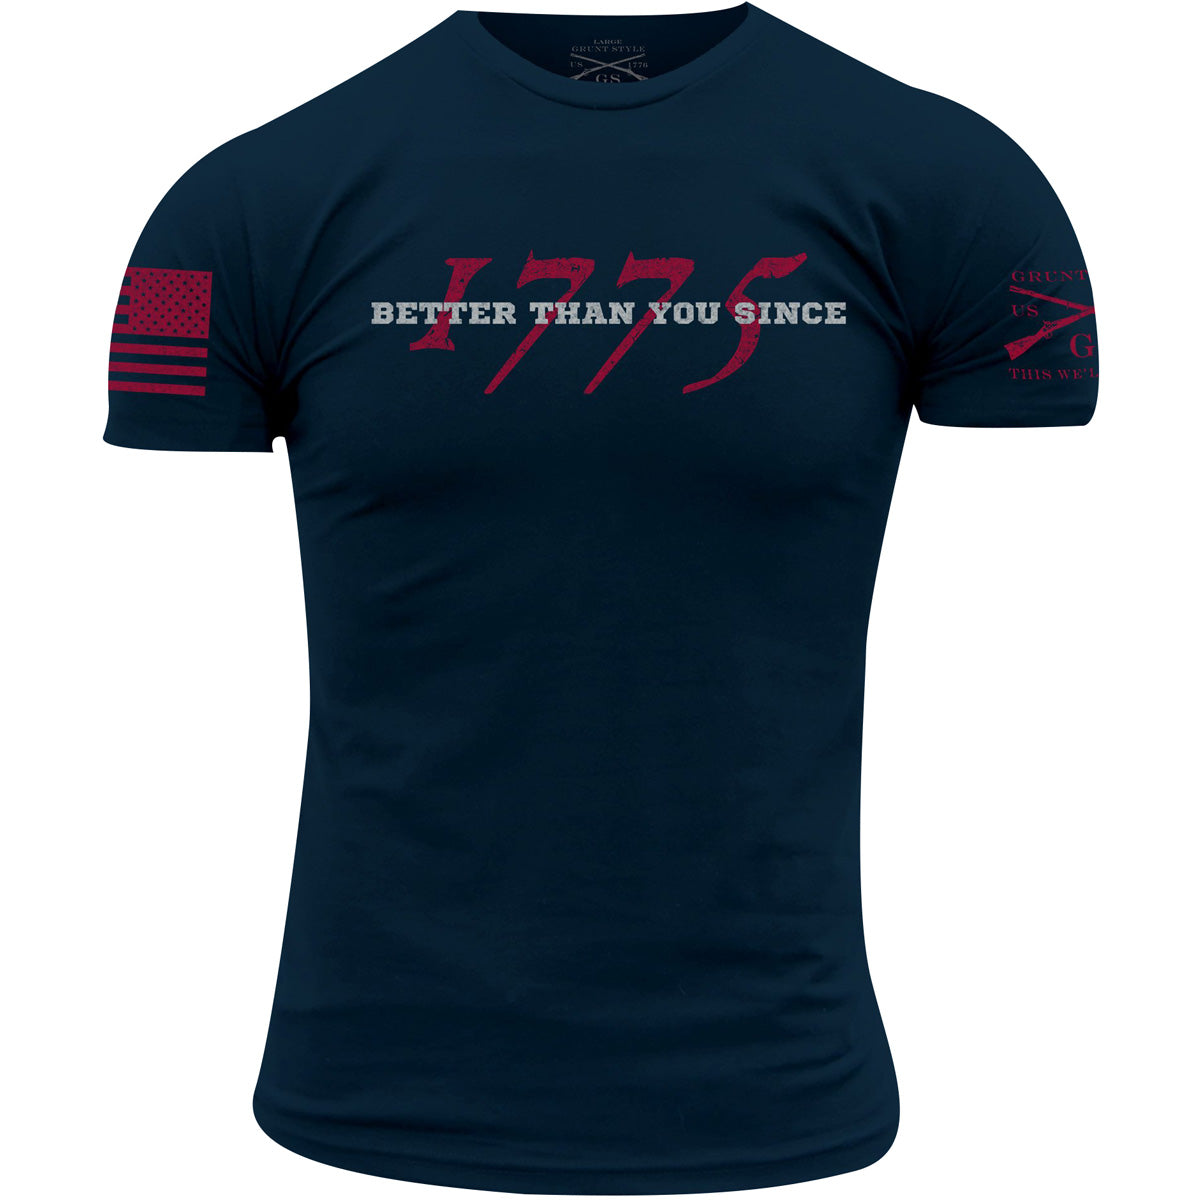 Grunt Style USMC - Better Than You Since 1775 T-Shirt - Navy Grunt Style